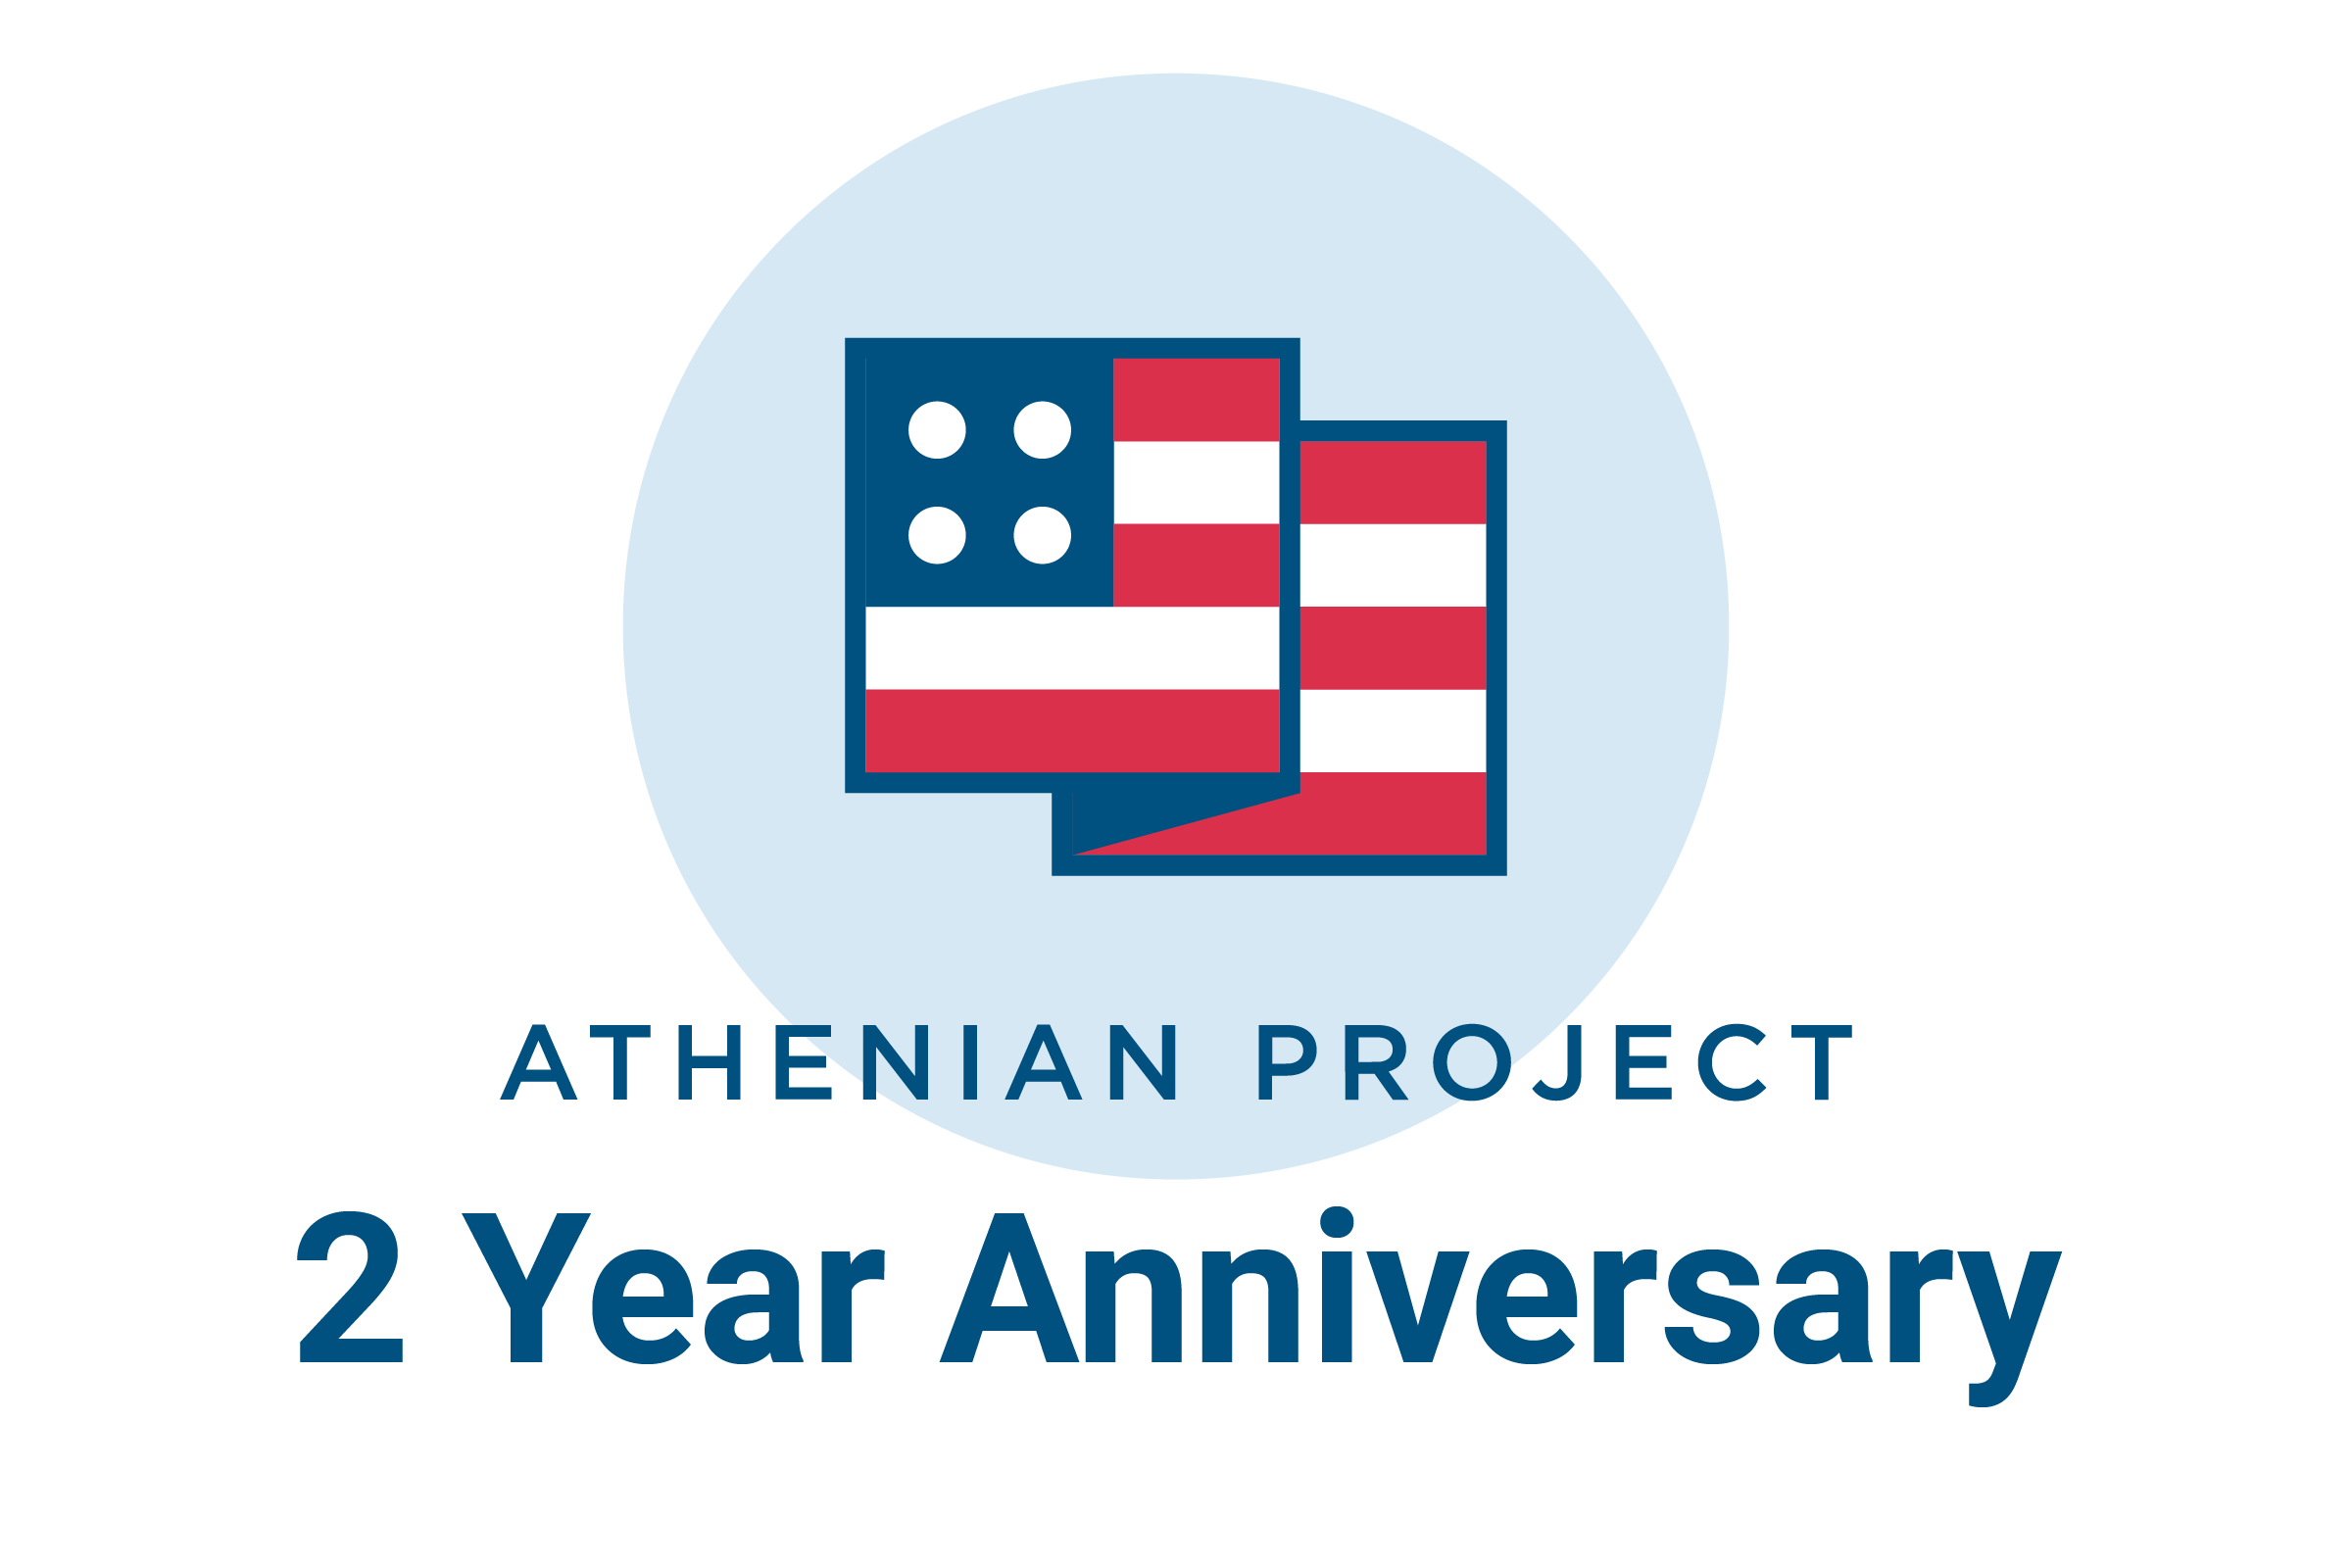 The Two-Year Anniversary of The Athenian Project: Preparing for the 2020 Elections.